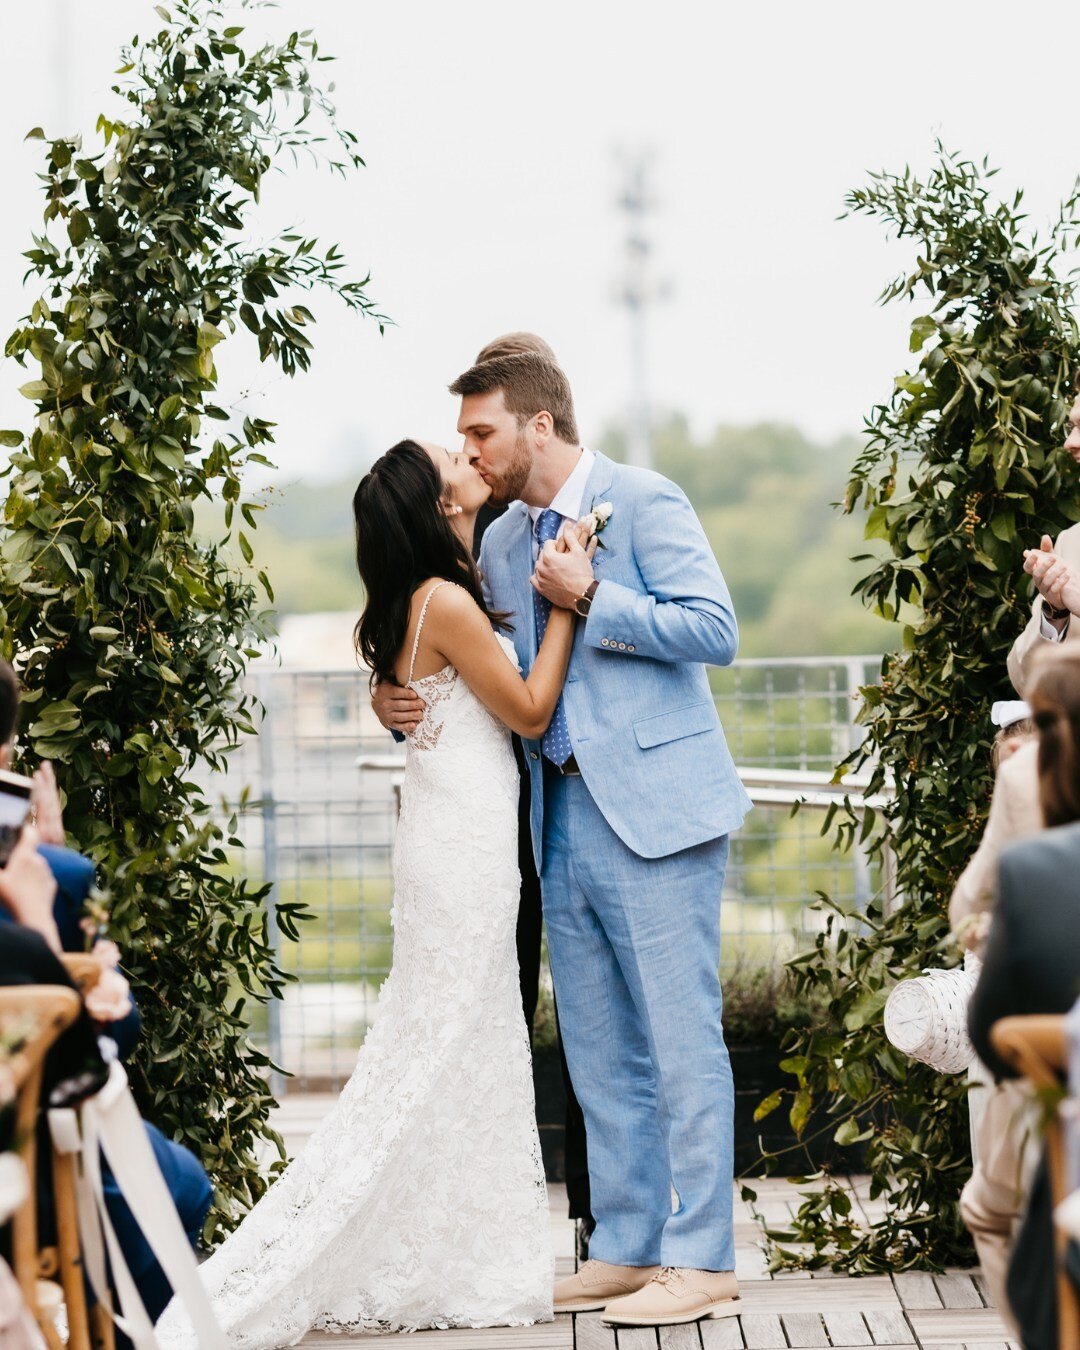 Weddings are better on The Roof! Join us in congratulating Ellie and Casey on their beautiful celebration of love. 💍
We have an exceptional events team dedicated solely to curating dream proposals and crafting exquisite weddings. Click the link in o